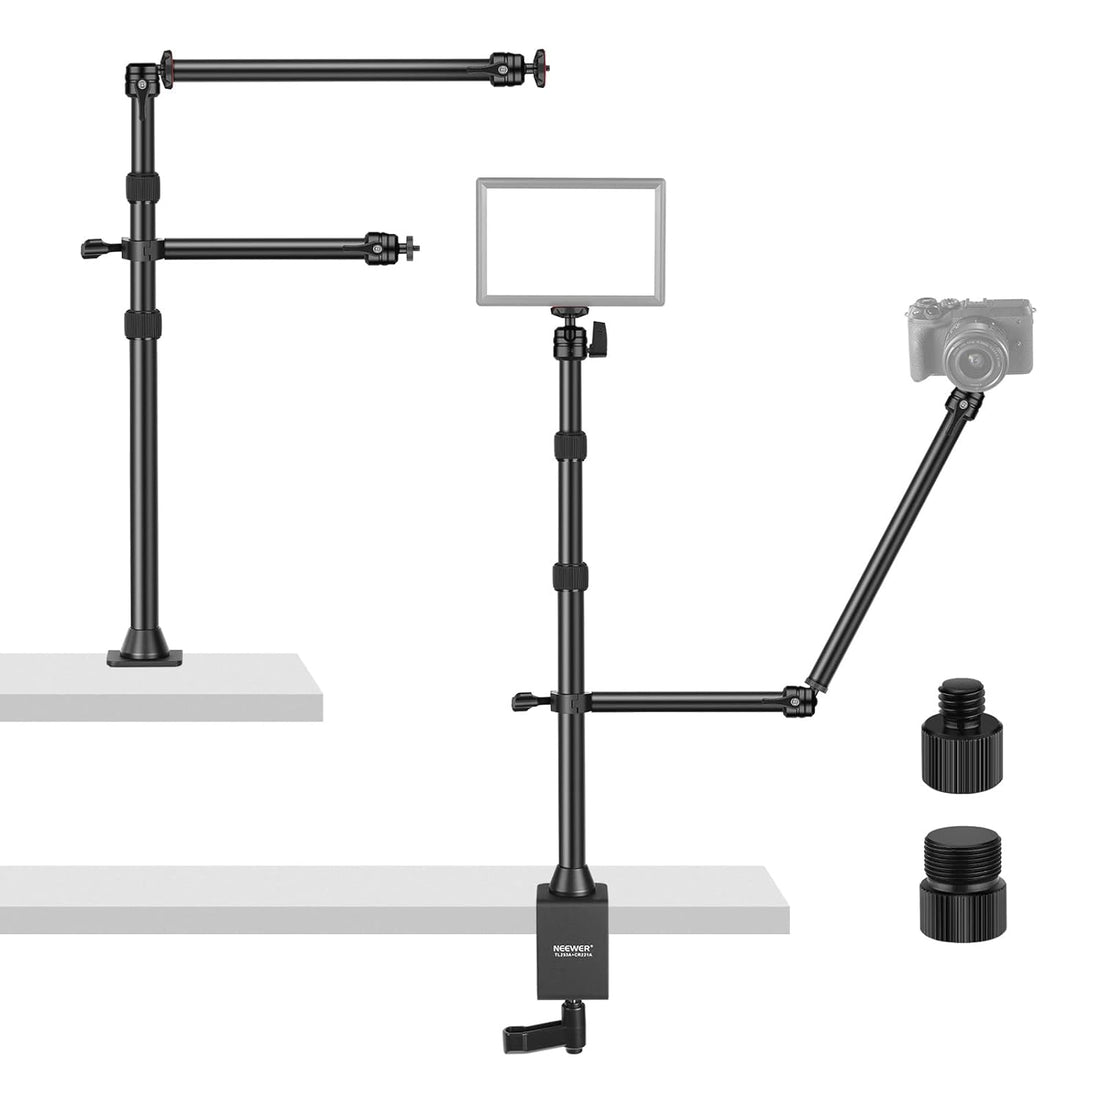 NEEWER Camera Desk Mount Stand with Two Auxiliary Holding Arms, Overhead Camera Mount Tabletop C Clamp 360° Swivel Ball Heads for DSLR, Webcam, Photography, Videography, Live Streaming, Zoom Calls